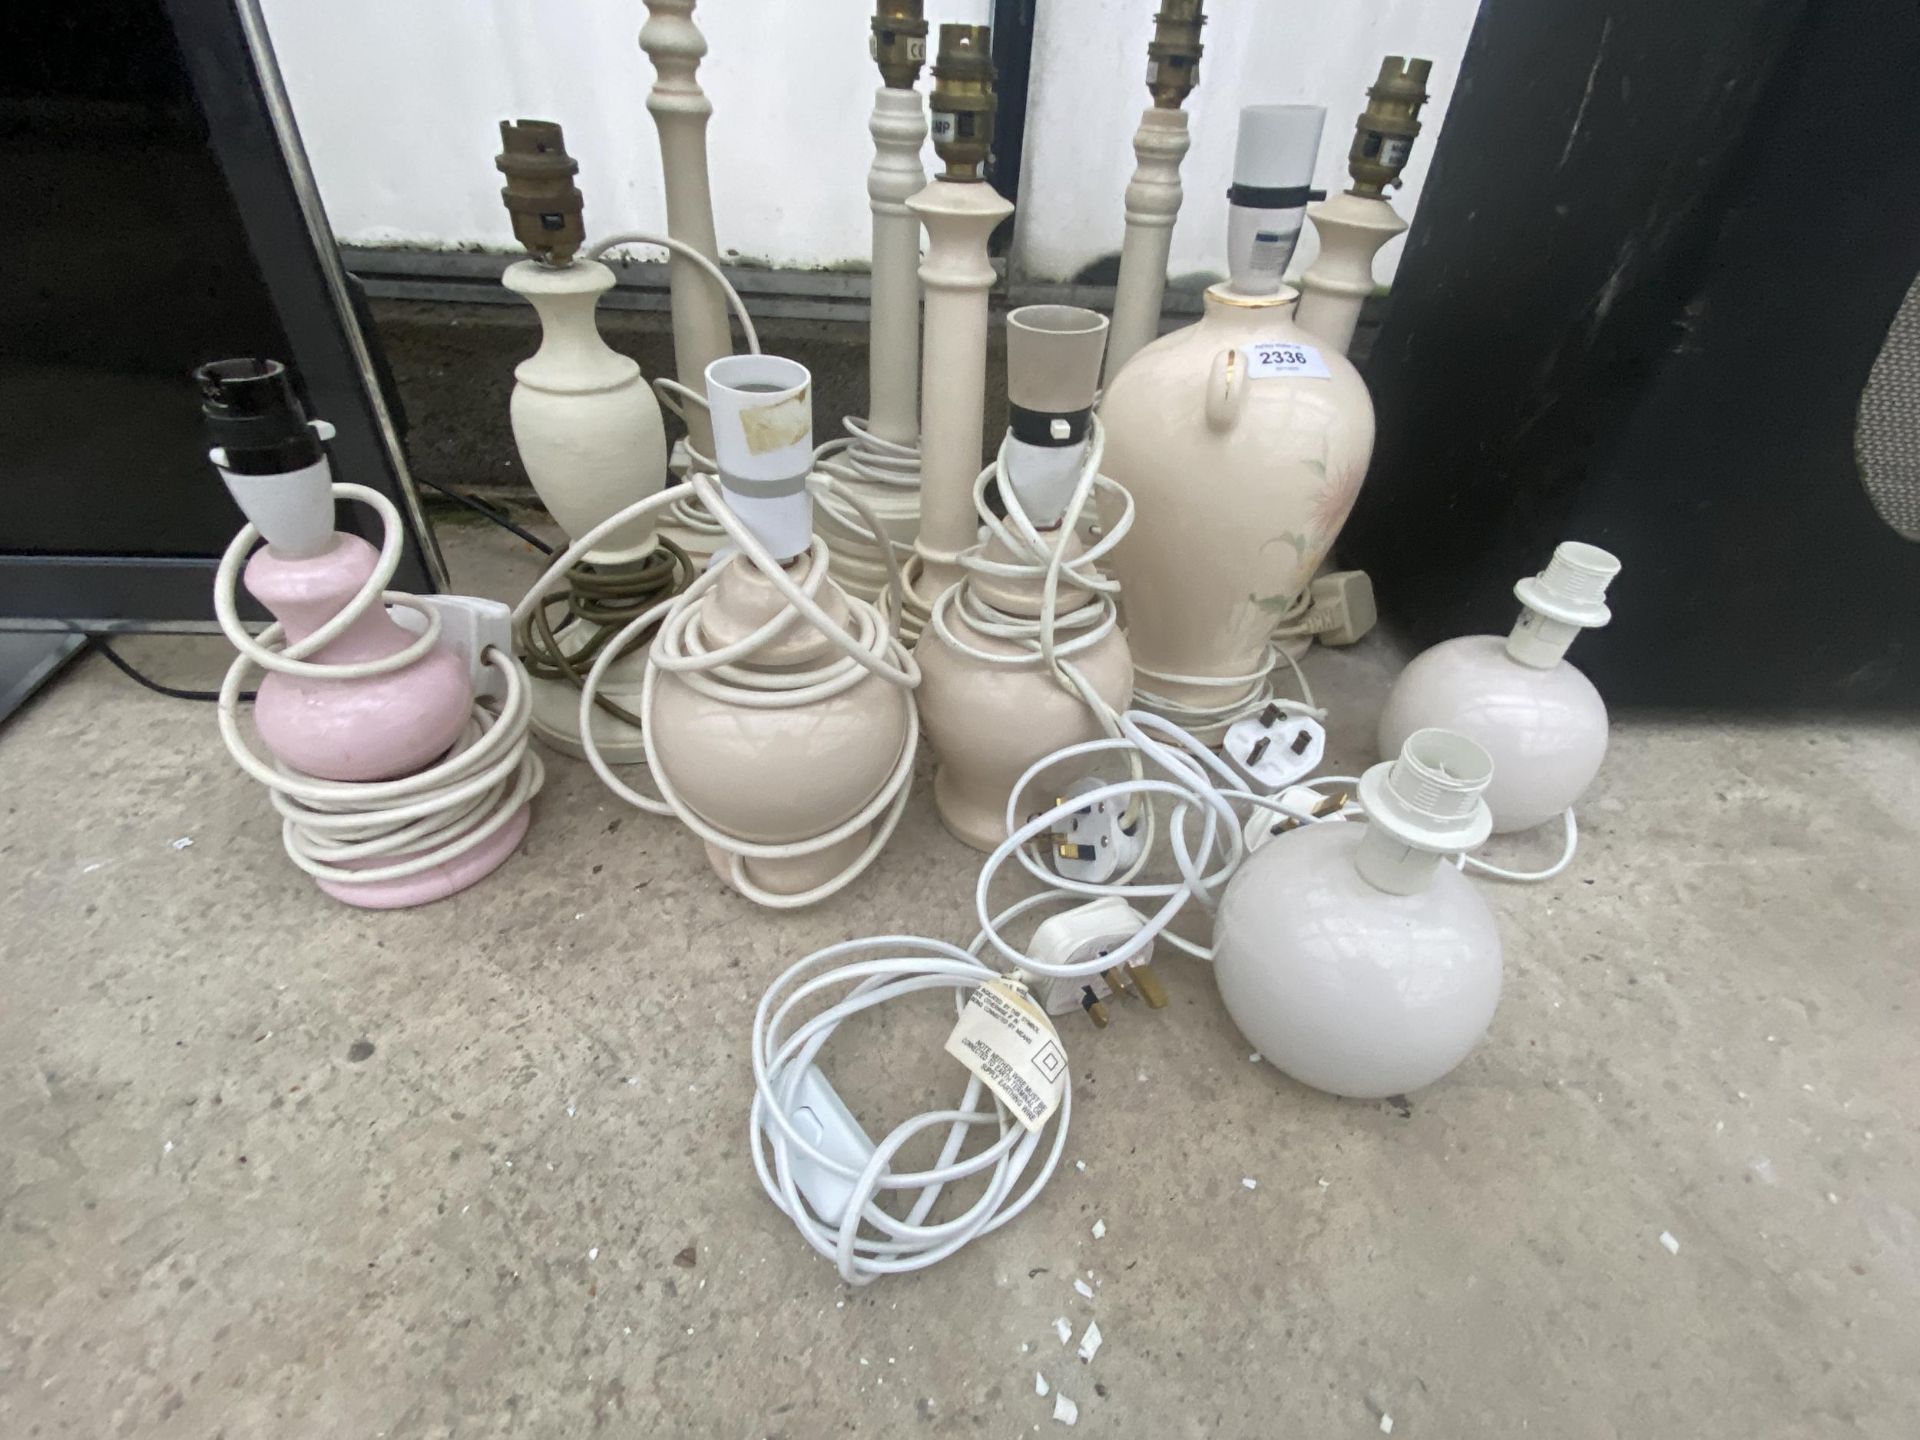 A LARGE ASSORTMENT OF CERAMIC AND WOODEN TABLE LAMPS - Image 2 of 3